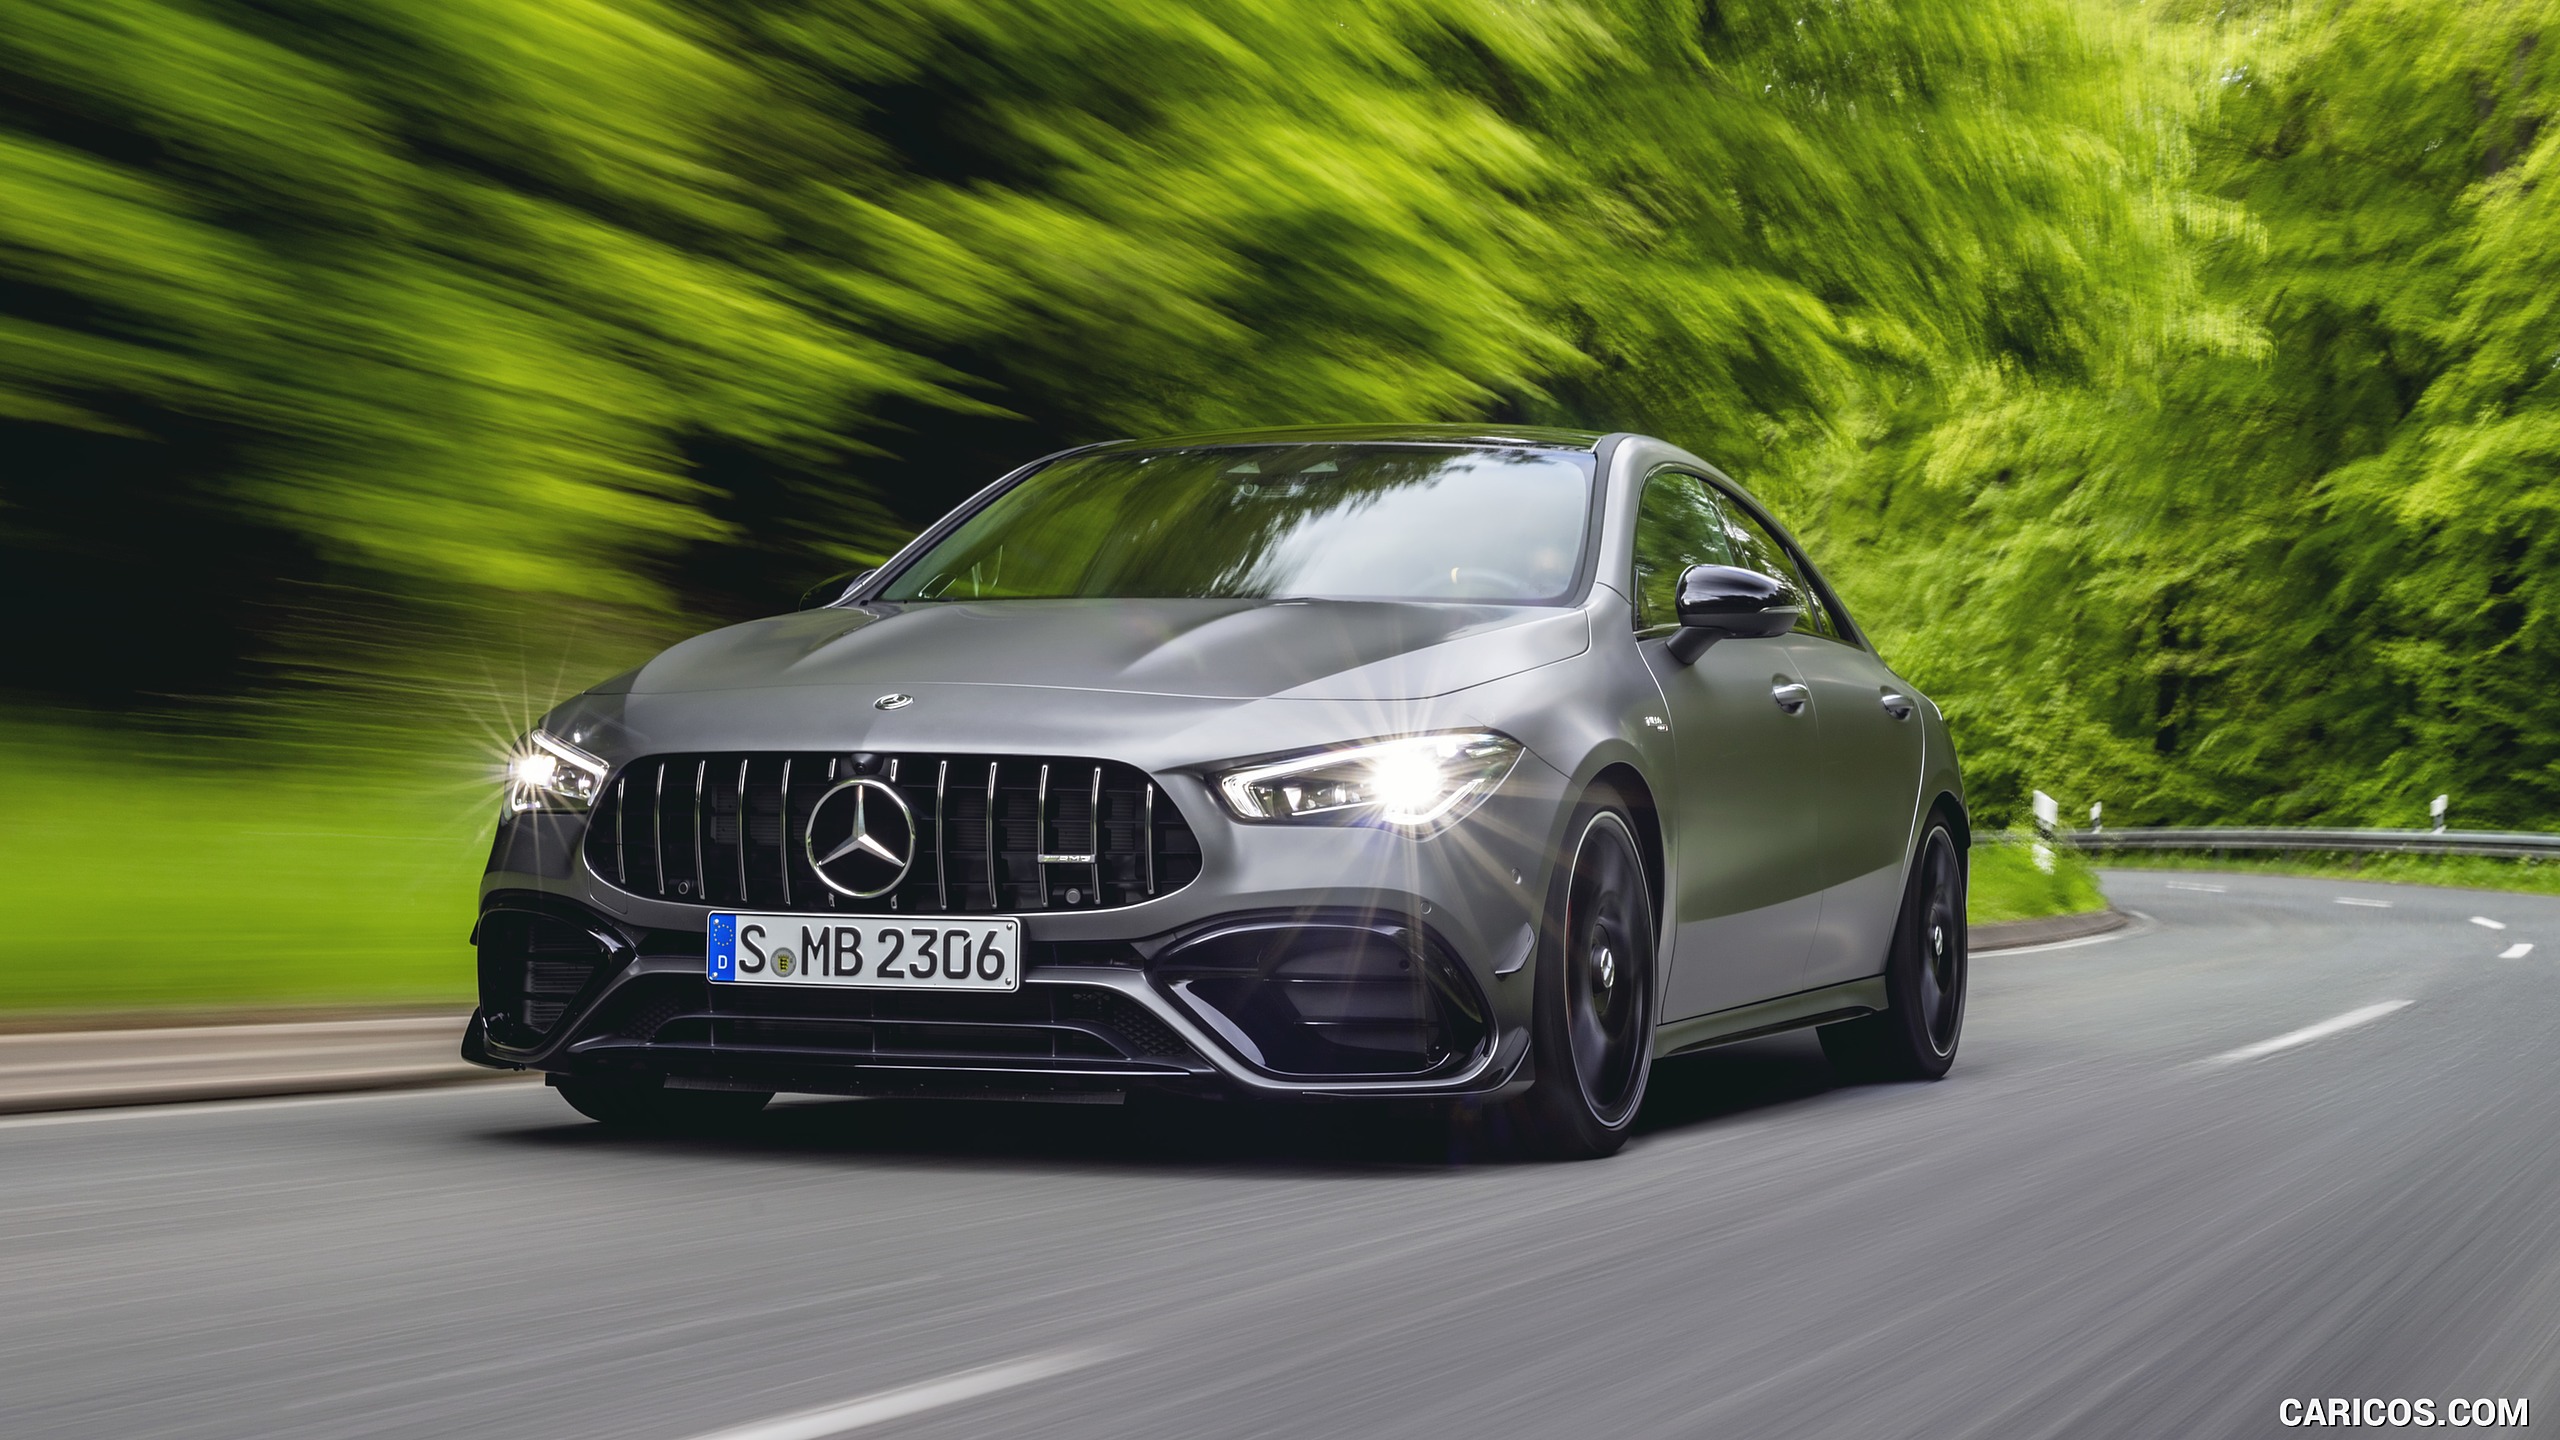 2020 Mercedes-AMG CLA 45 S 4MATIC+ - Front, #4 of 159